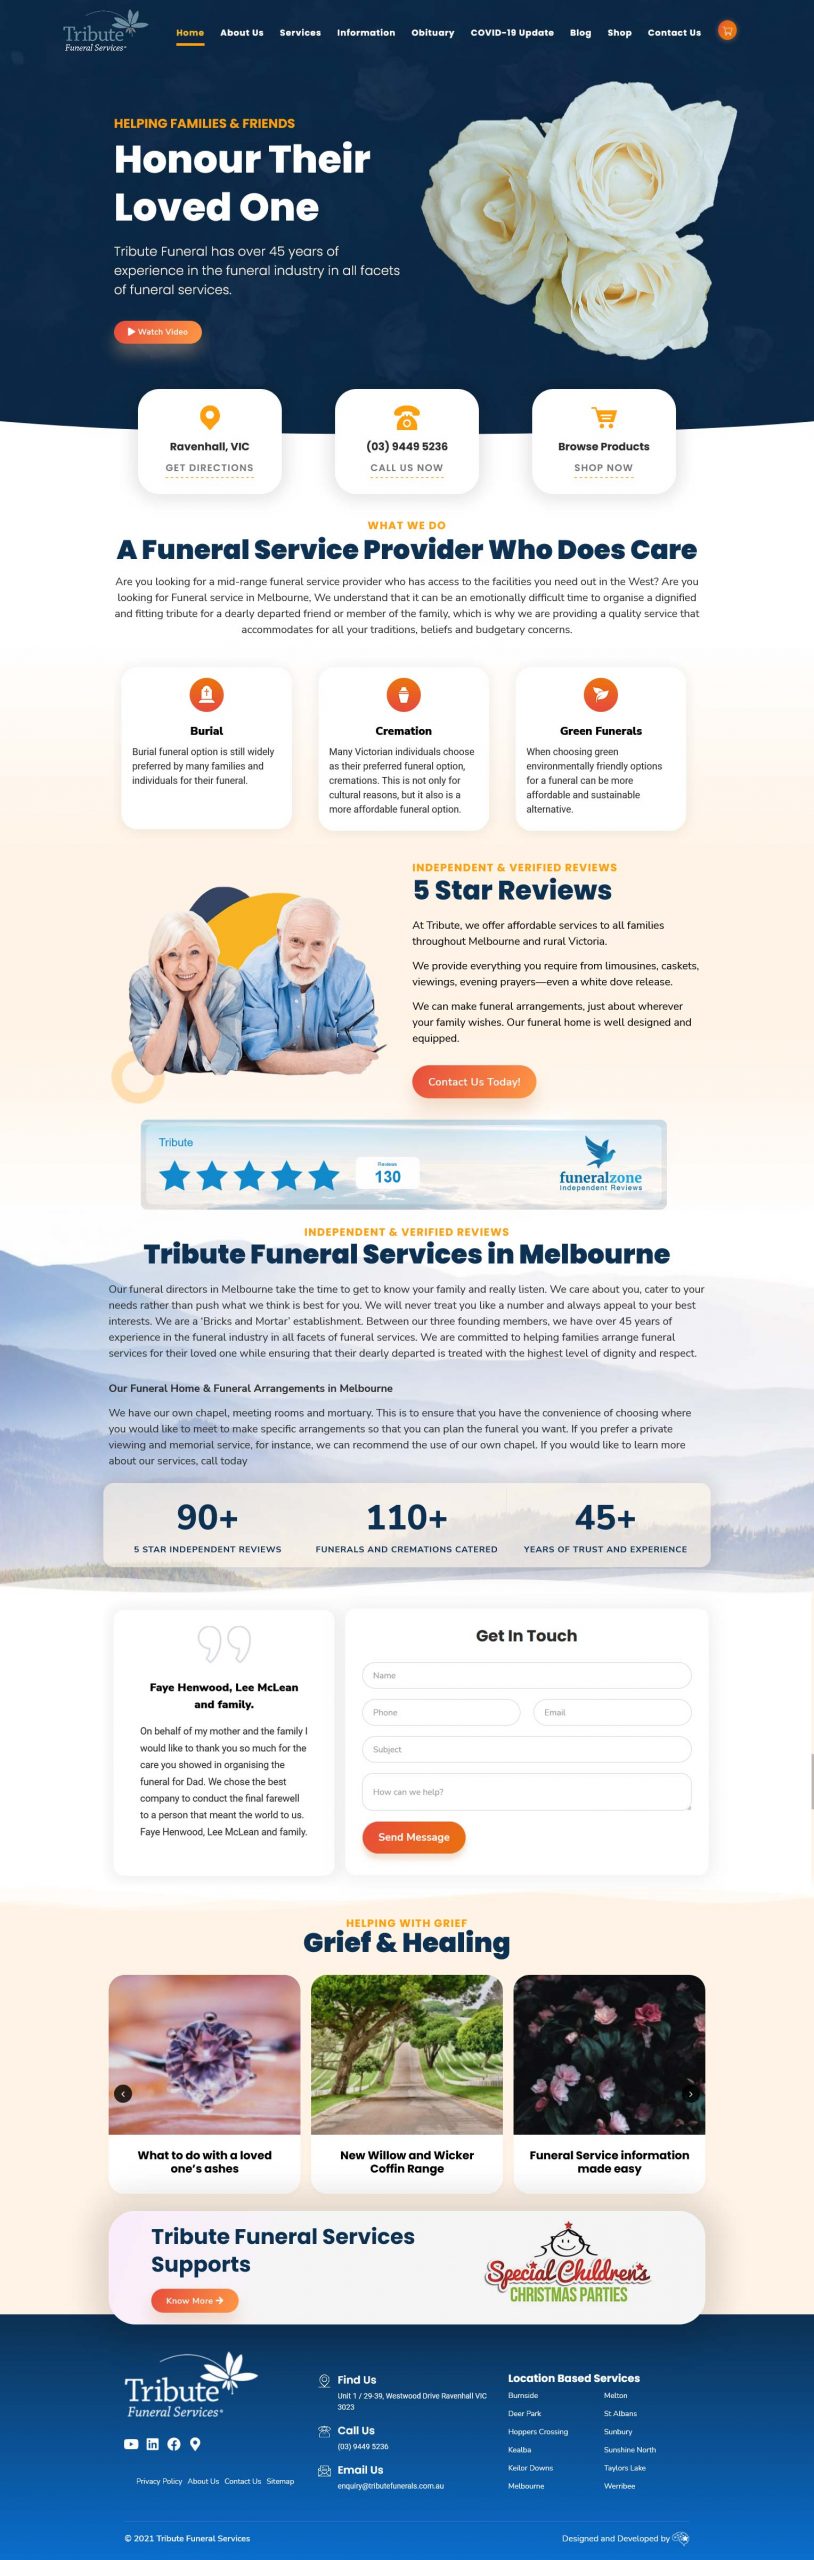 Tribute Funeral Services homepage